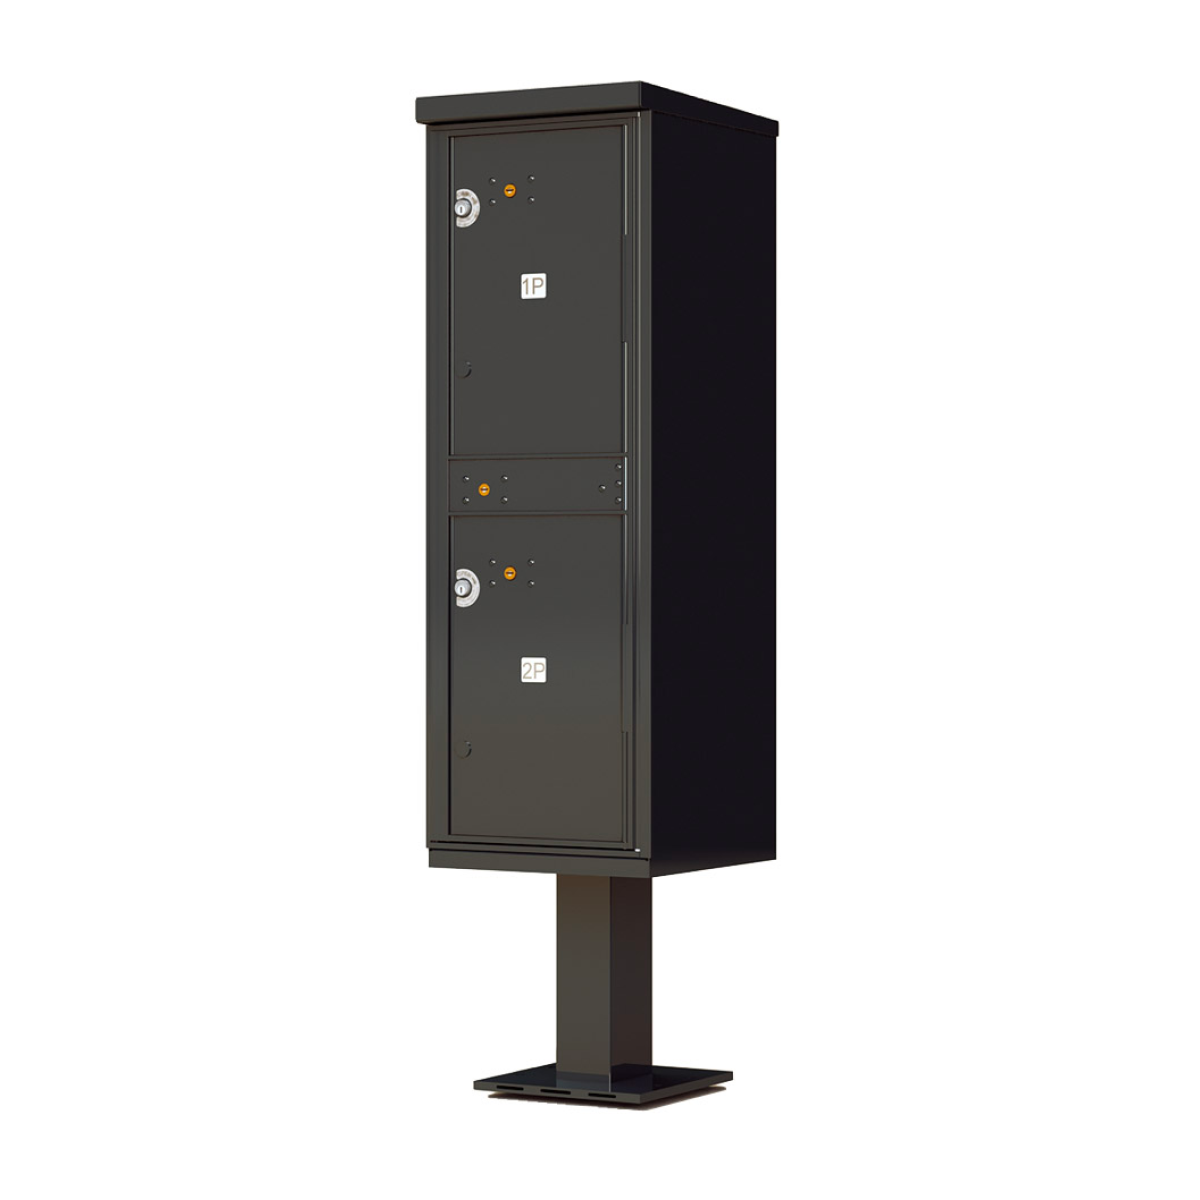 Florence CBU Cluster Mailbox – 2 Parcel Lockers Product Image